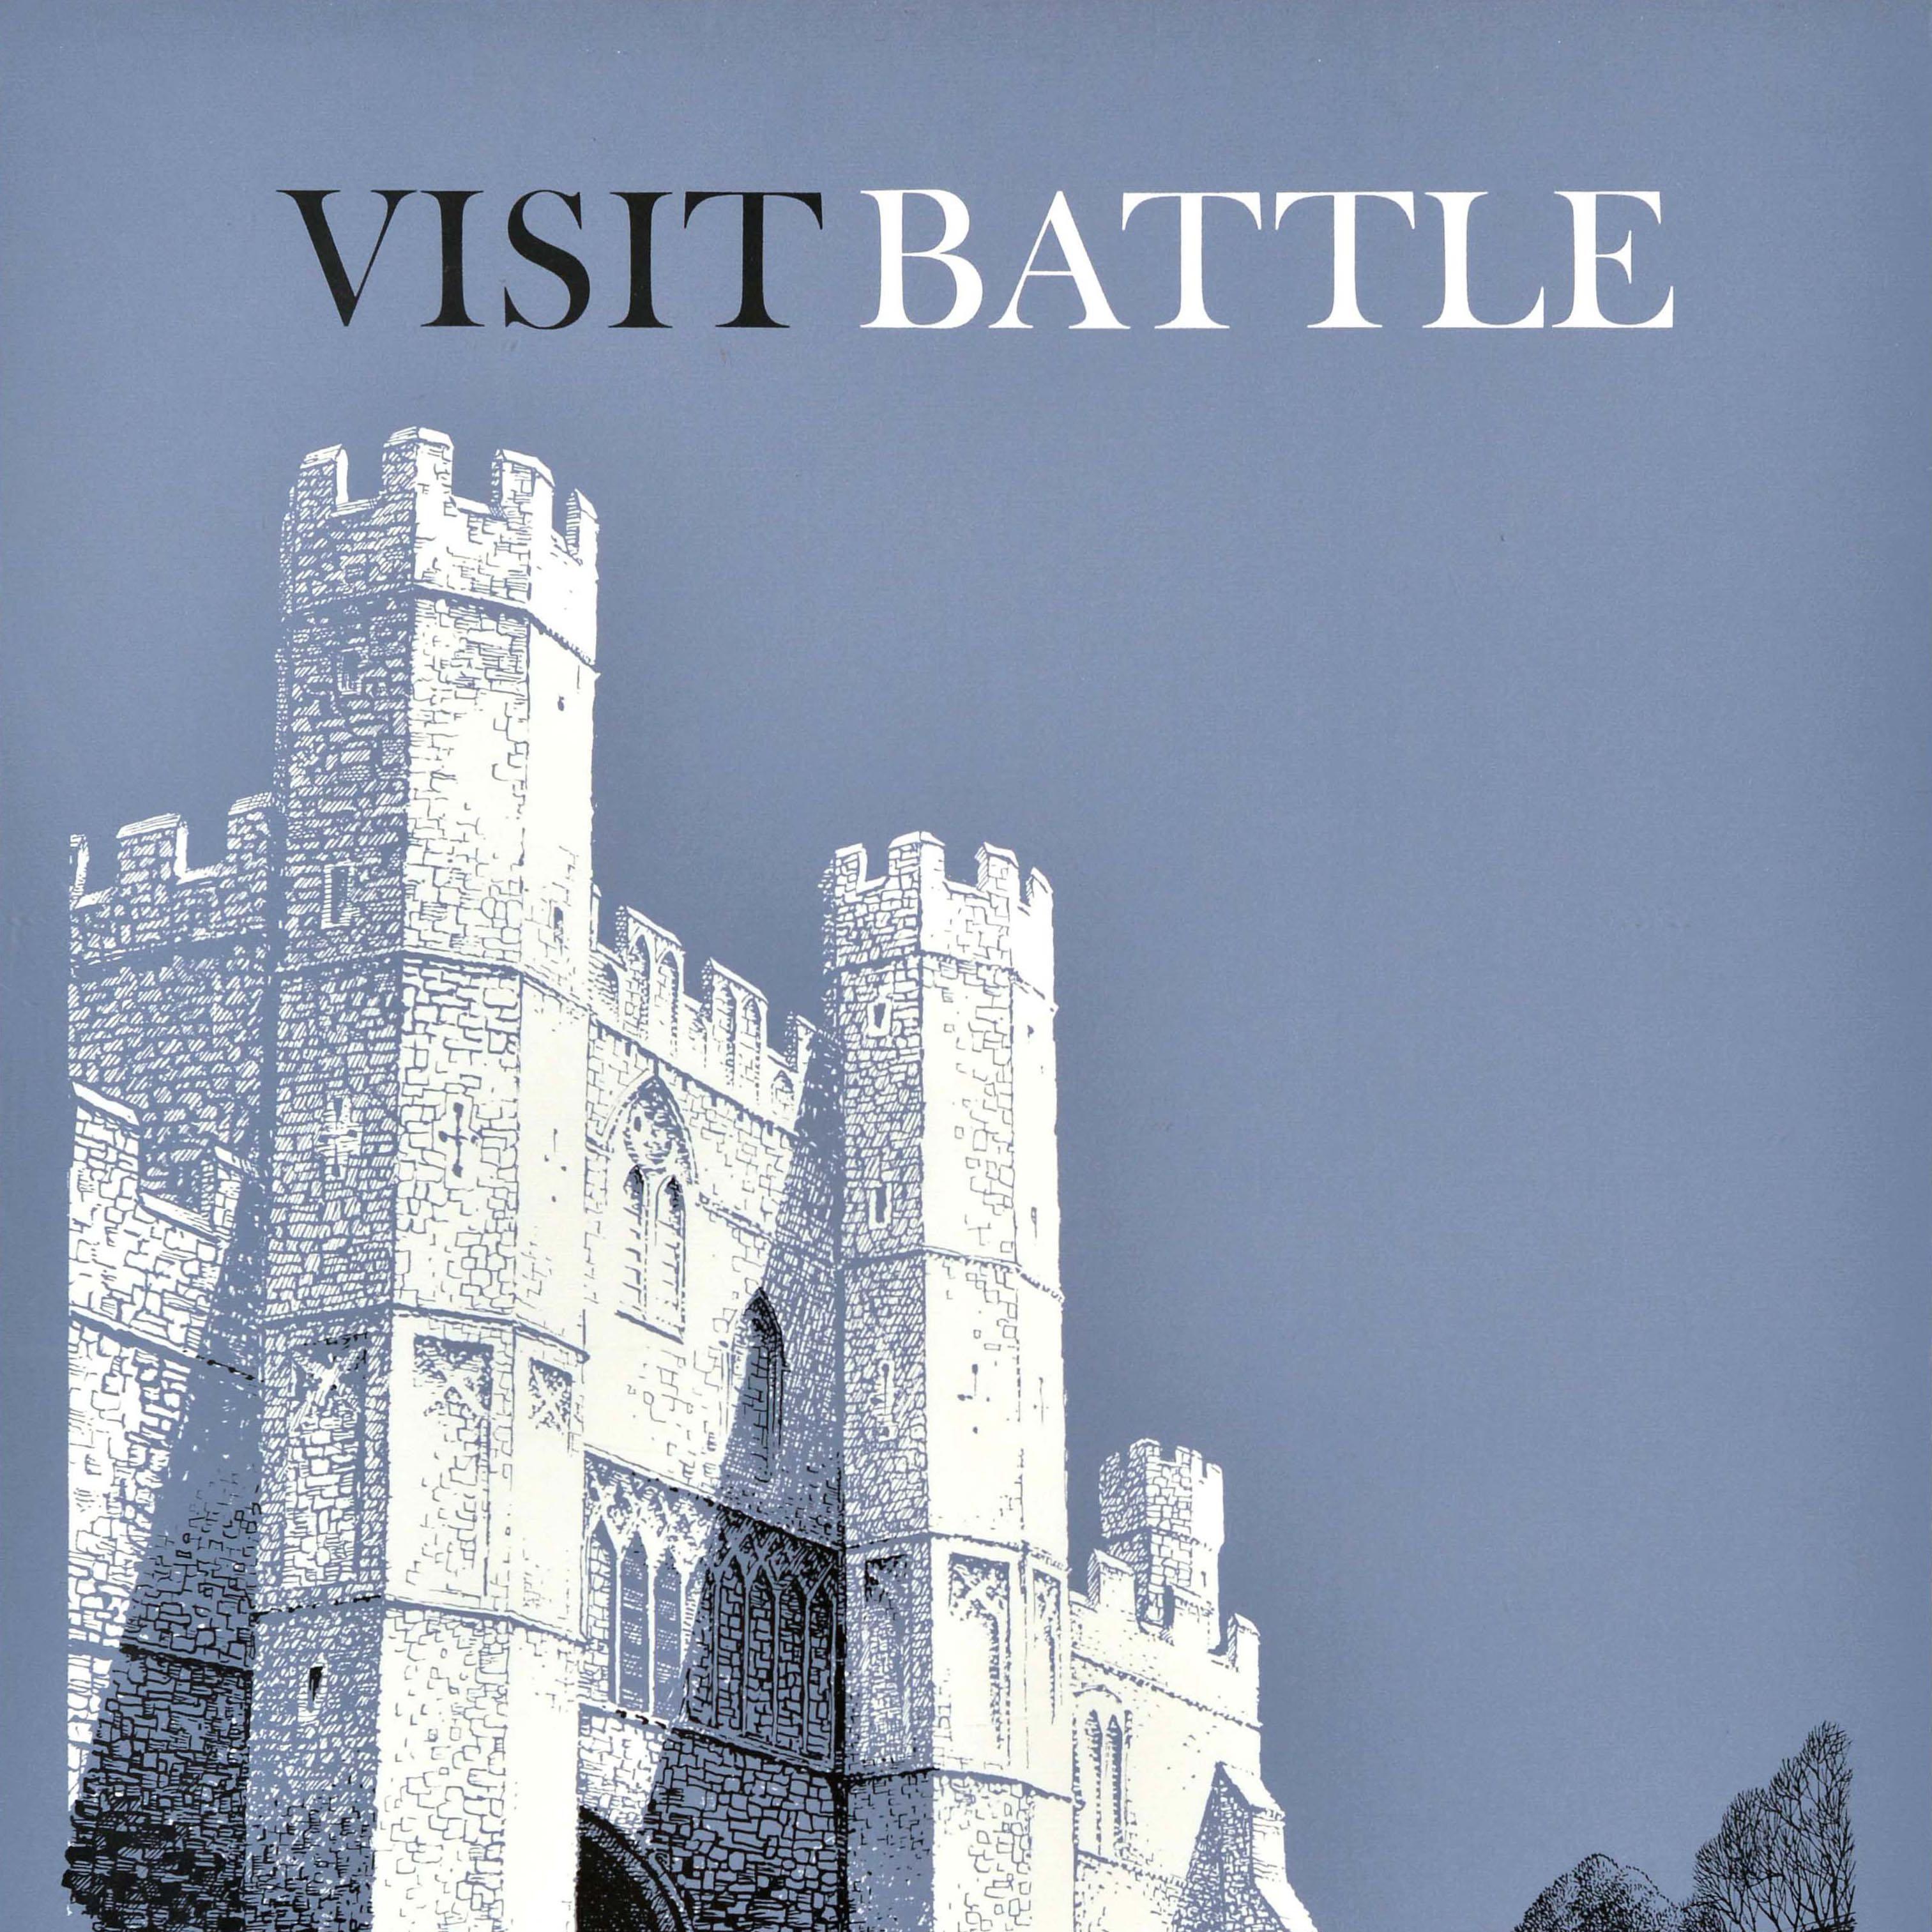 Original vintage train travel poster - Visit Battle - featuring artwork by the notable commercial artist and poster designer Reginald Montague Lander (1913-1980) depicting people visiting the partially ruined historic Battle Abbey in Sussex built in